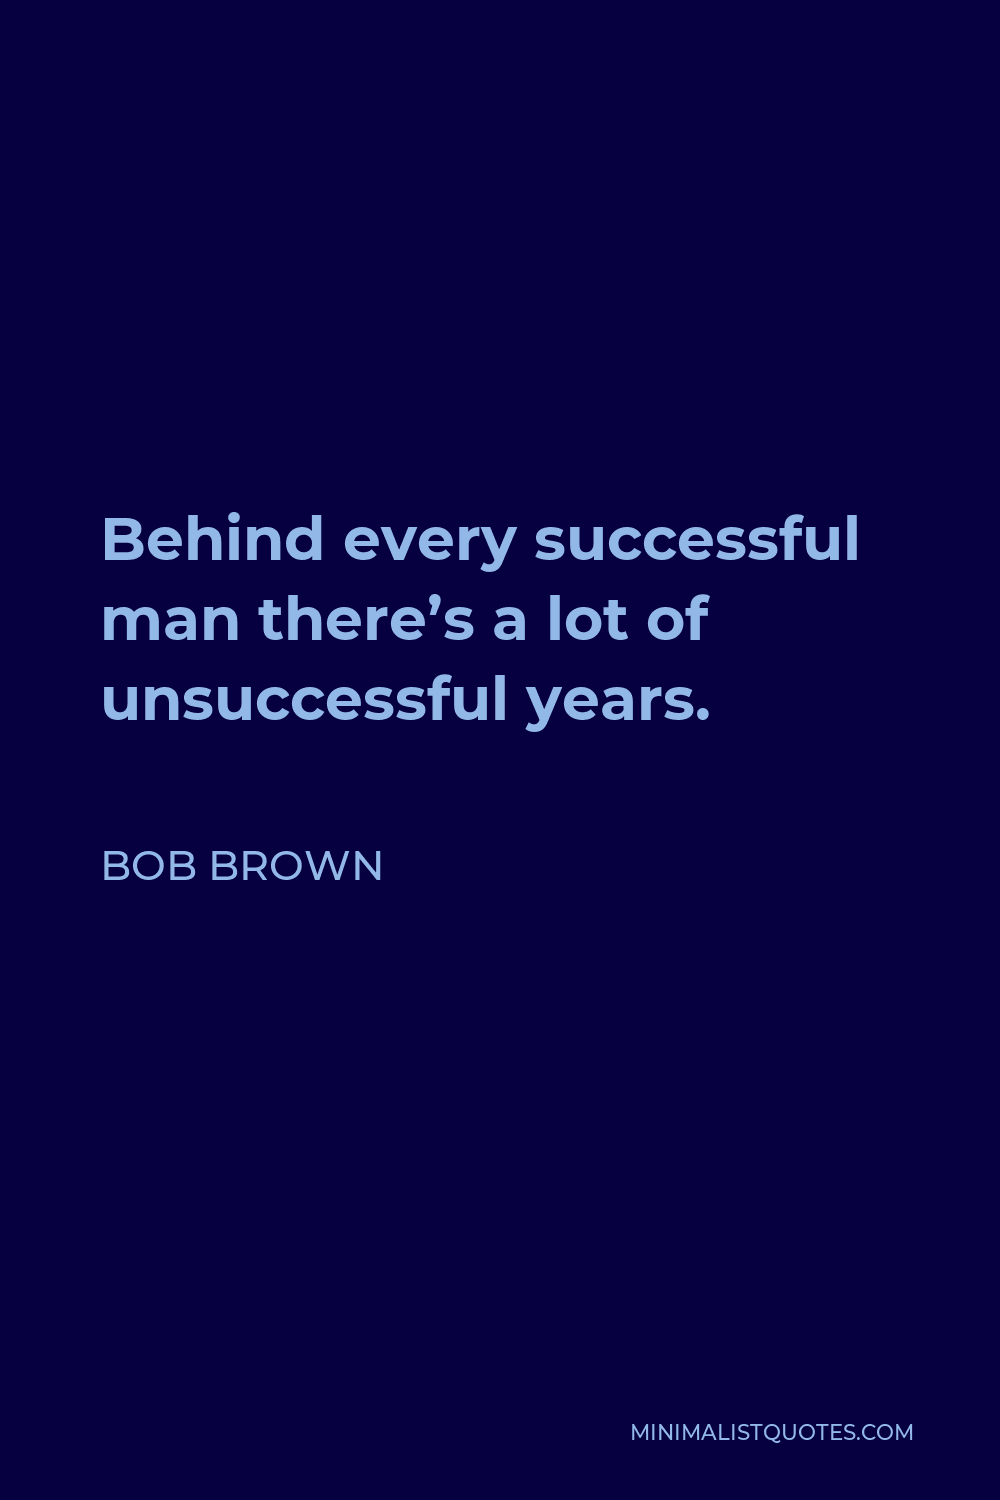 Bob Brown Quote - Behind every successful man there’s a lot of unsuccessful years.